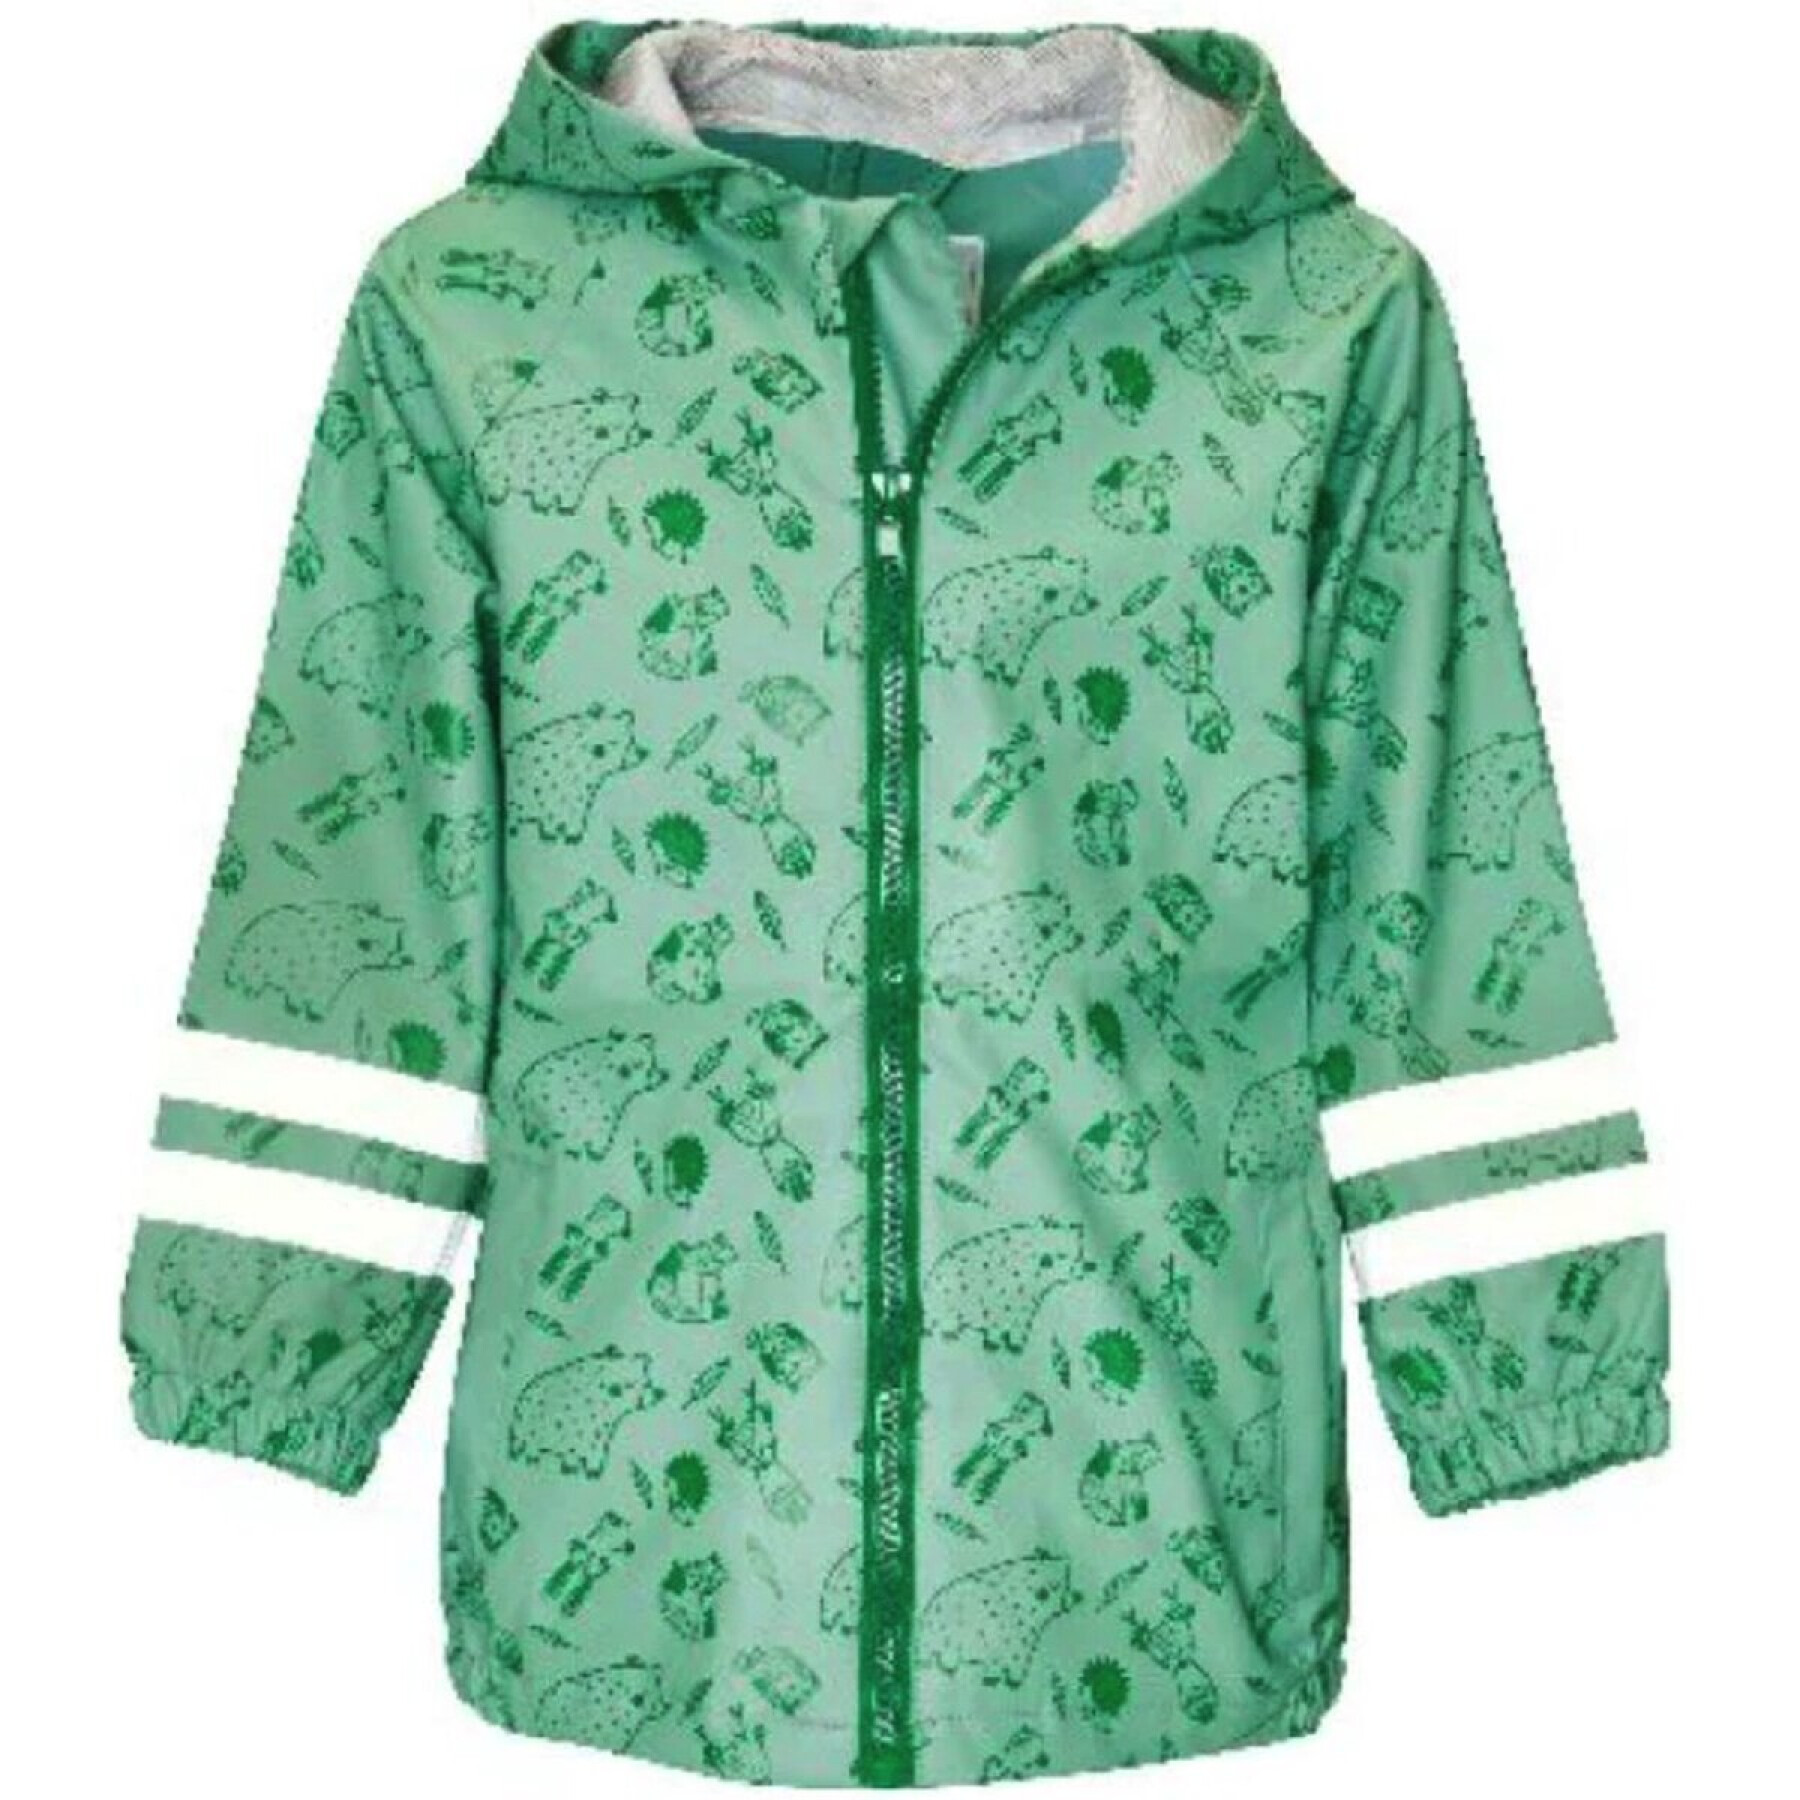 Baby girl waterproof jacket Playshoes Forest Animals